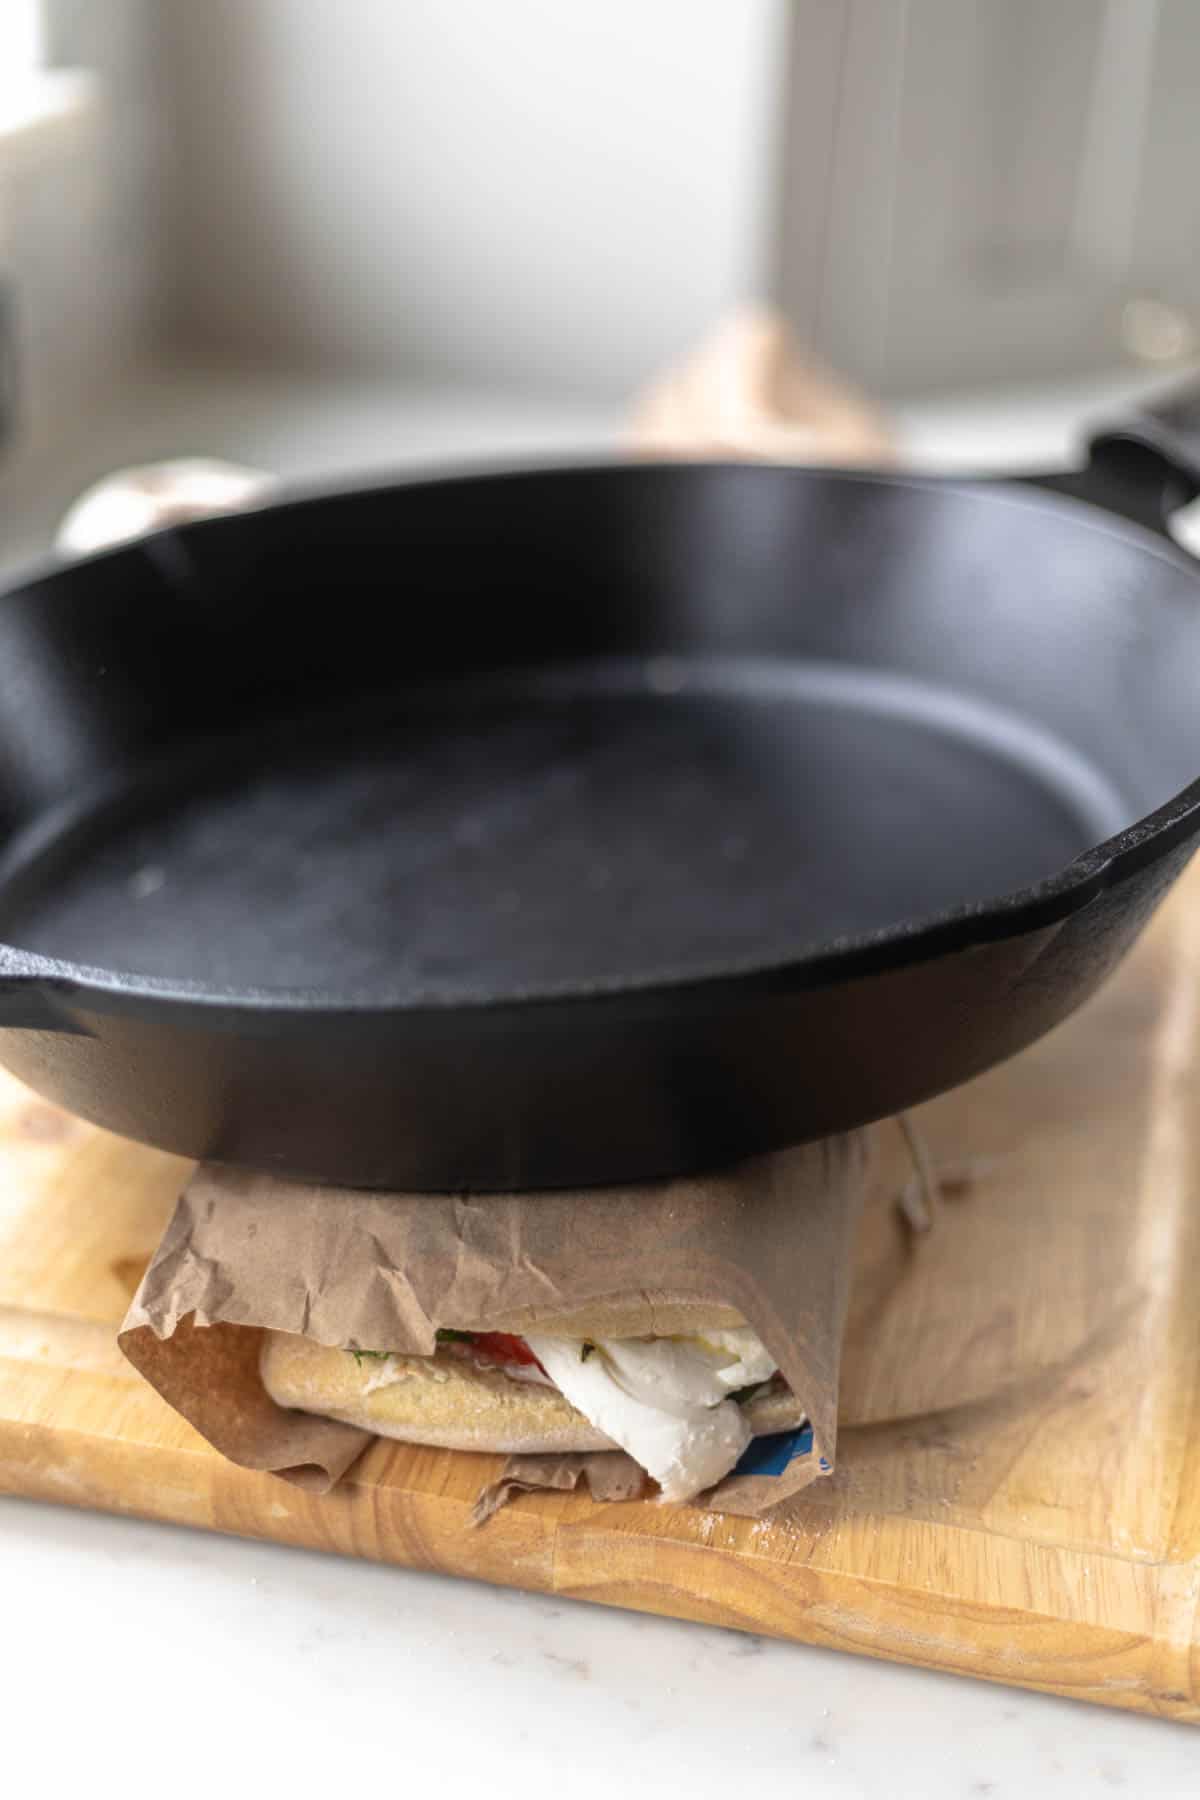 a sandwich on a wooden board being pressed down by a cast iron skillet